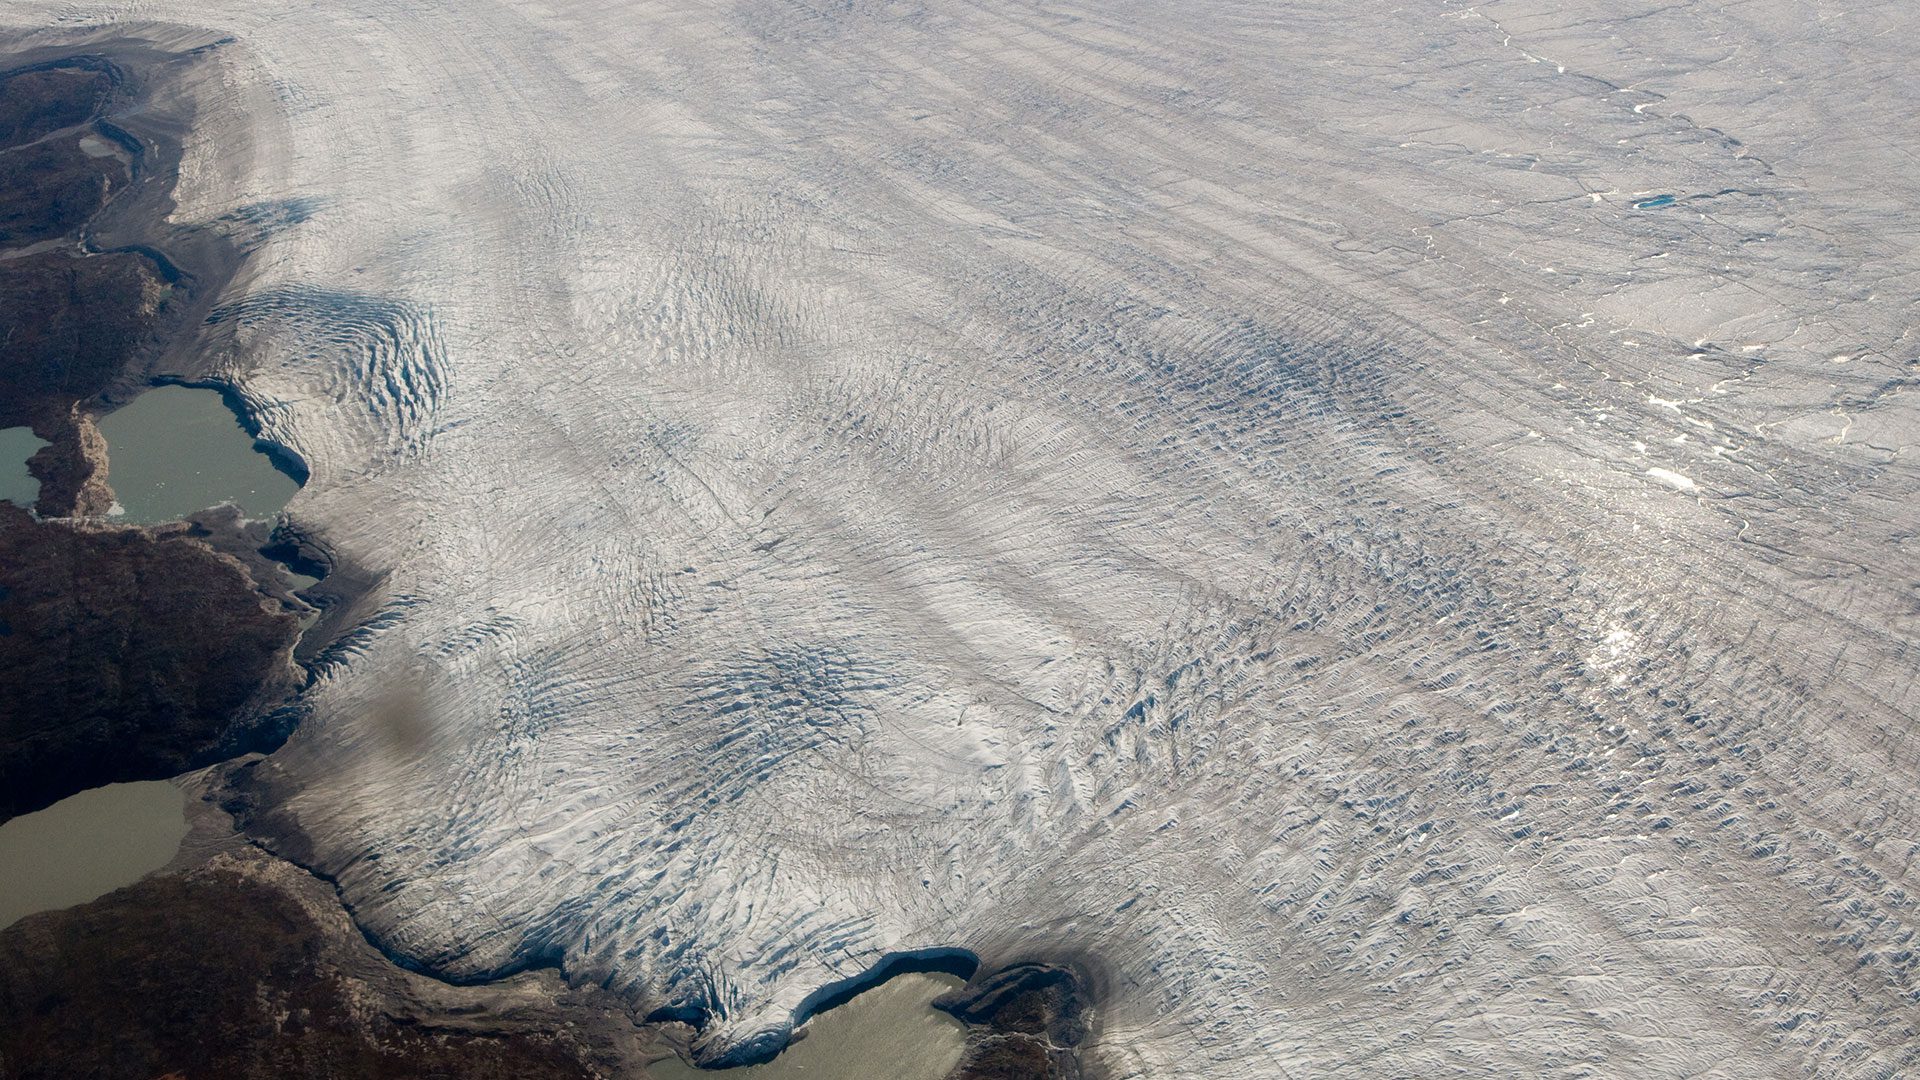 From the air, Greenland's ice sheet looked like white molasses oozing down the mountainside and into the sea. Researchers are investigating Greenland's glacial lakes, which form atop the ice sheet each spring and summer as returning sunlight melts ice and snow. They have found that as lake grow larger, large cracks can open up at their bases, allowing the lake water to drain in a dramatic surge all the way to the bedrock at the bottom of glaciers. The water lubricates the base of the glacier, like grease on a railroad track, allowing glaciers to flow faster toward the coast and discharge more ice to the ocean